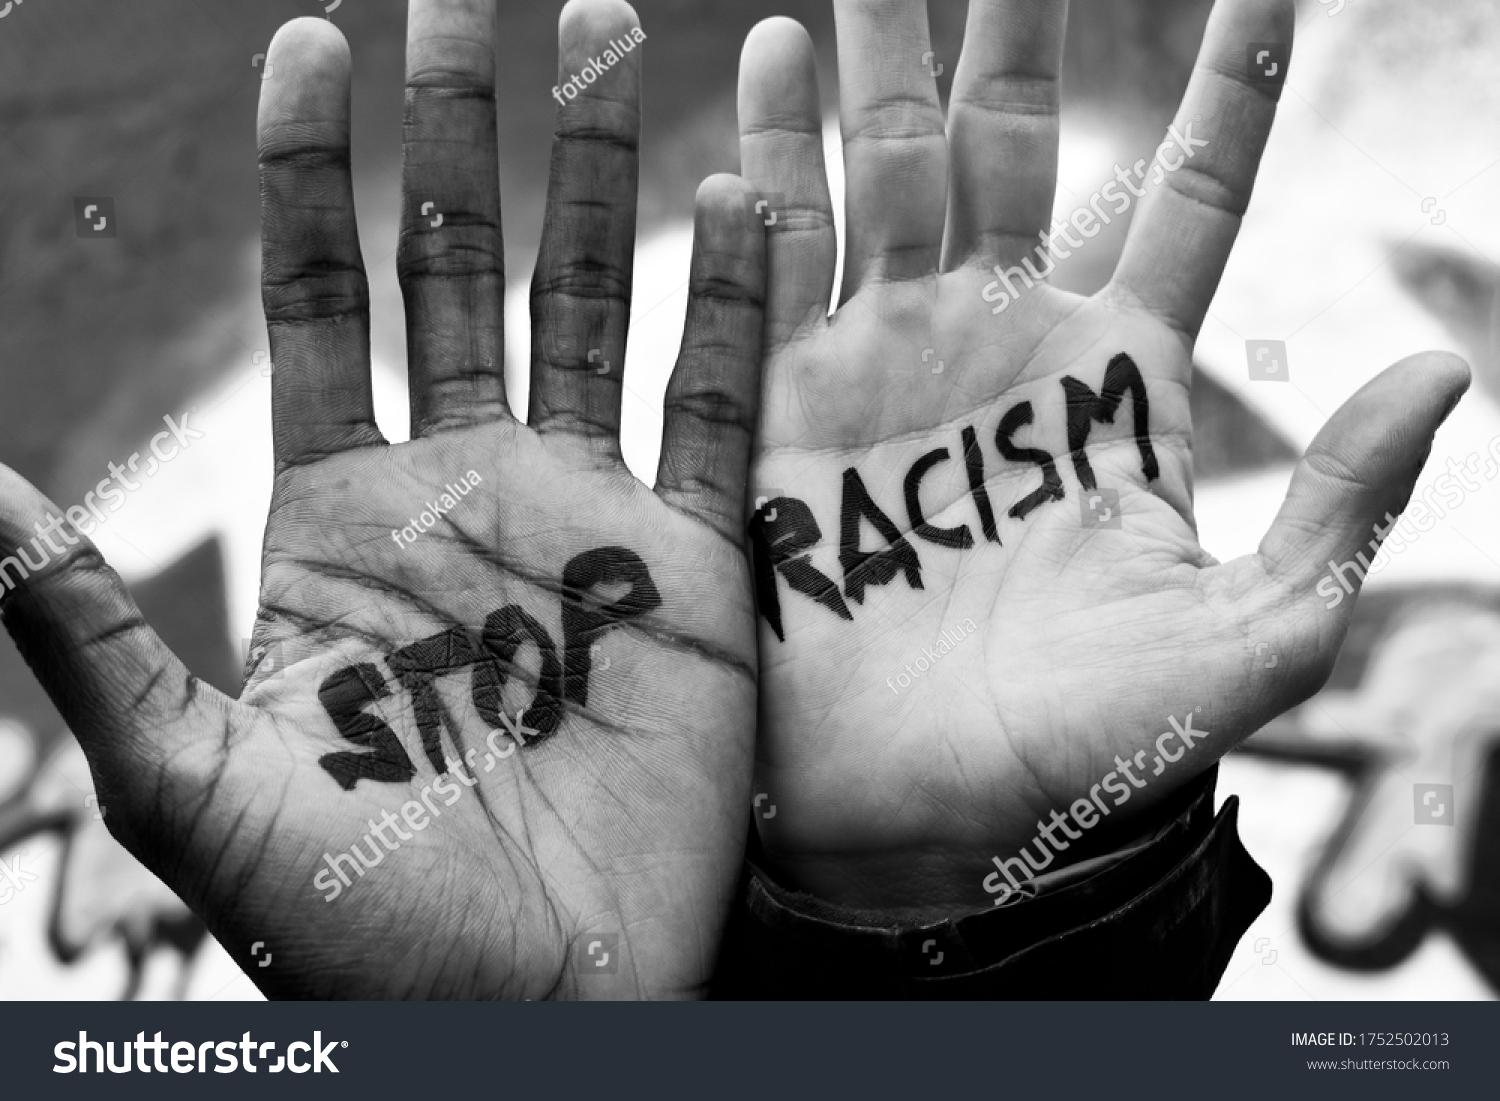 Close-up of the raised hands of two men of different ethnicity with the slogan "stop racism" written on their palms. Black and white anti racism image. #1752502013